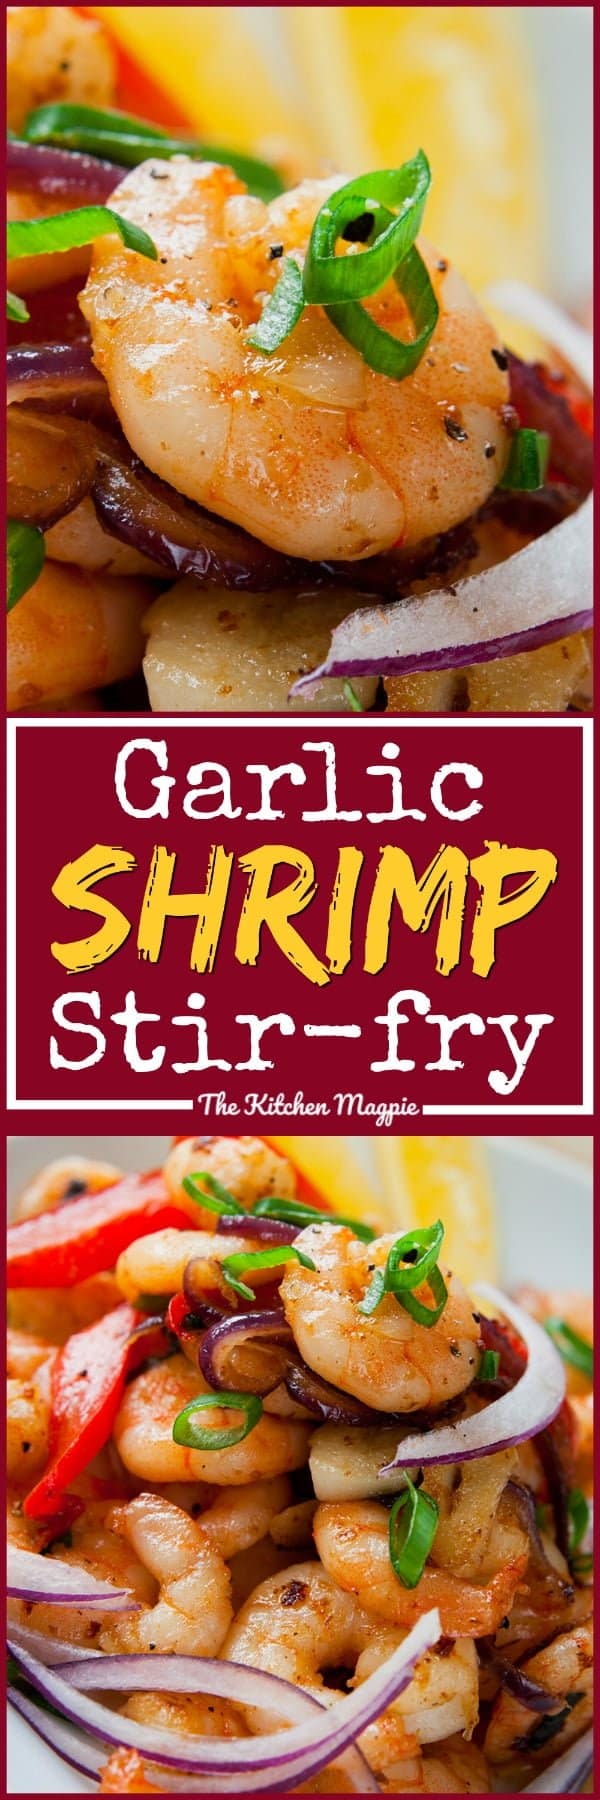 Simple & Easy Garlic Shrimp Stir-Fry with Peppers & Onions. Recipe from @kitchenmagpie #shrimp #recipes #healthyrecipes